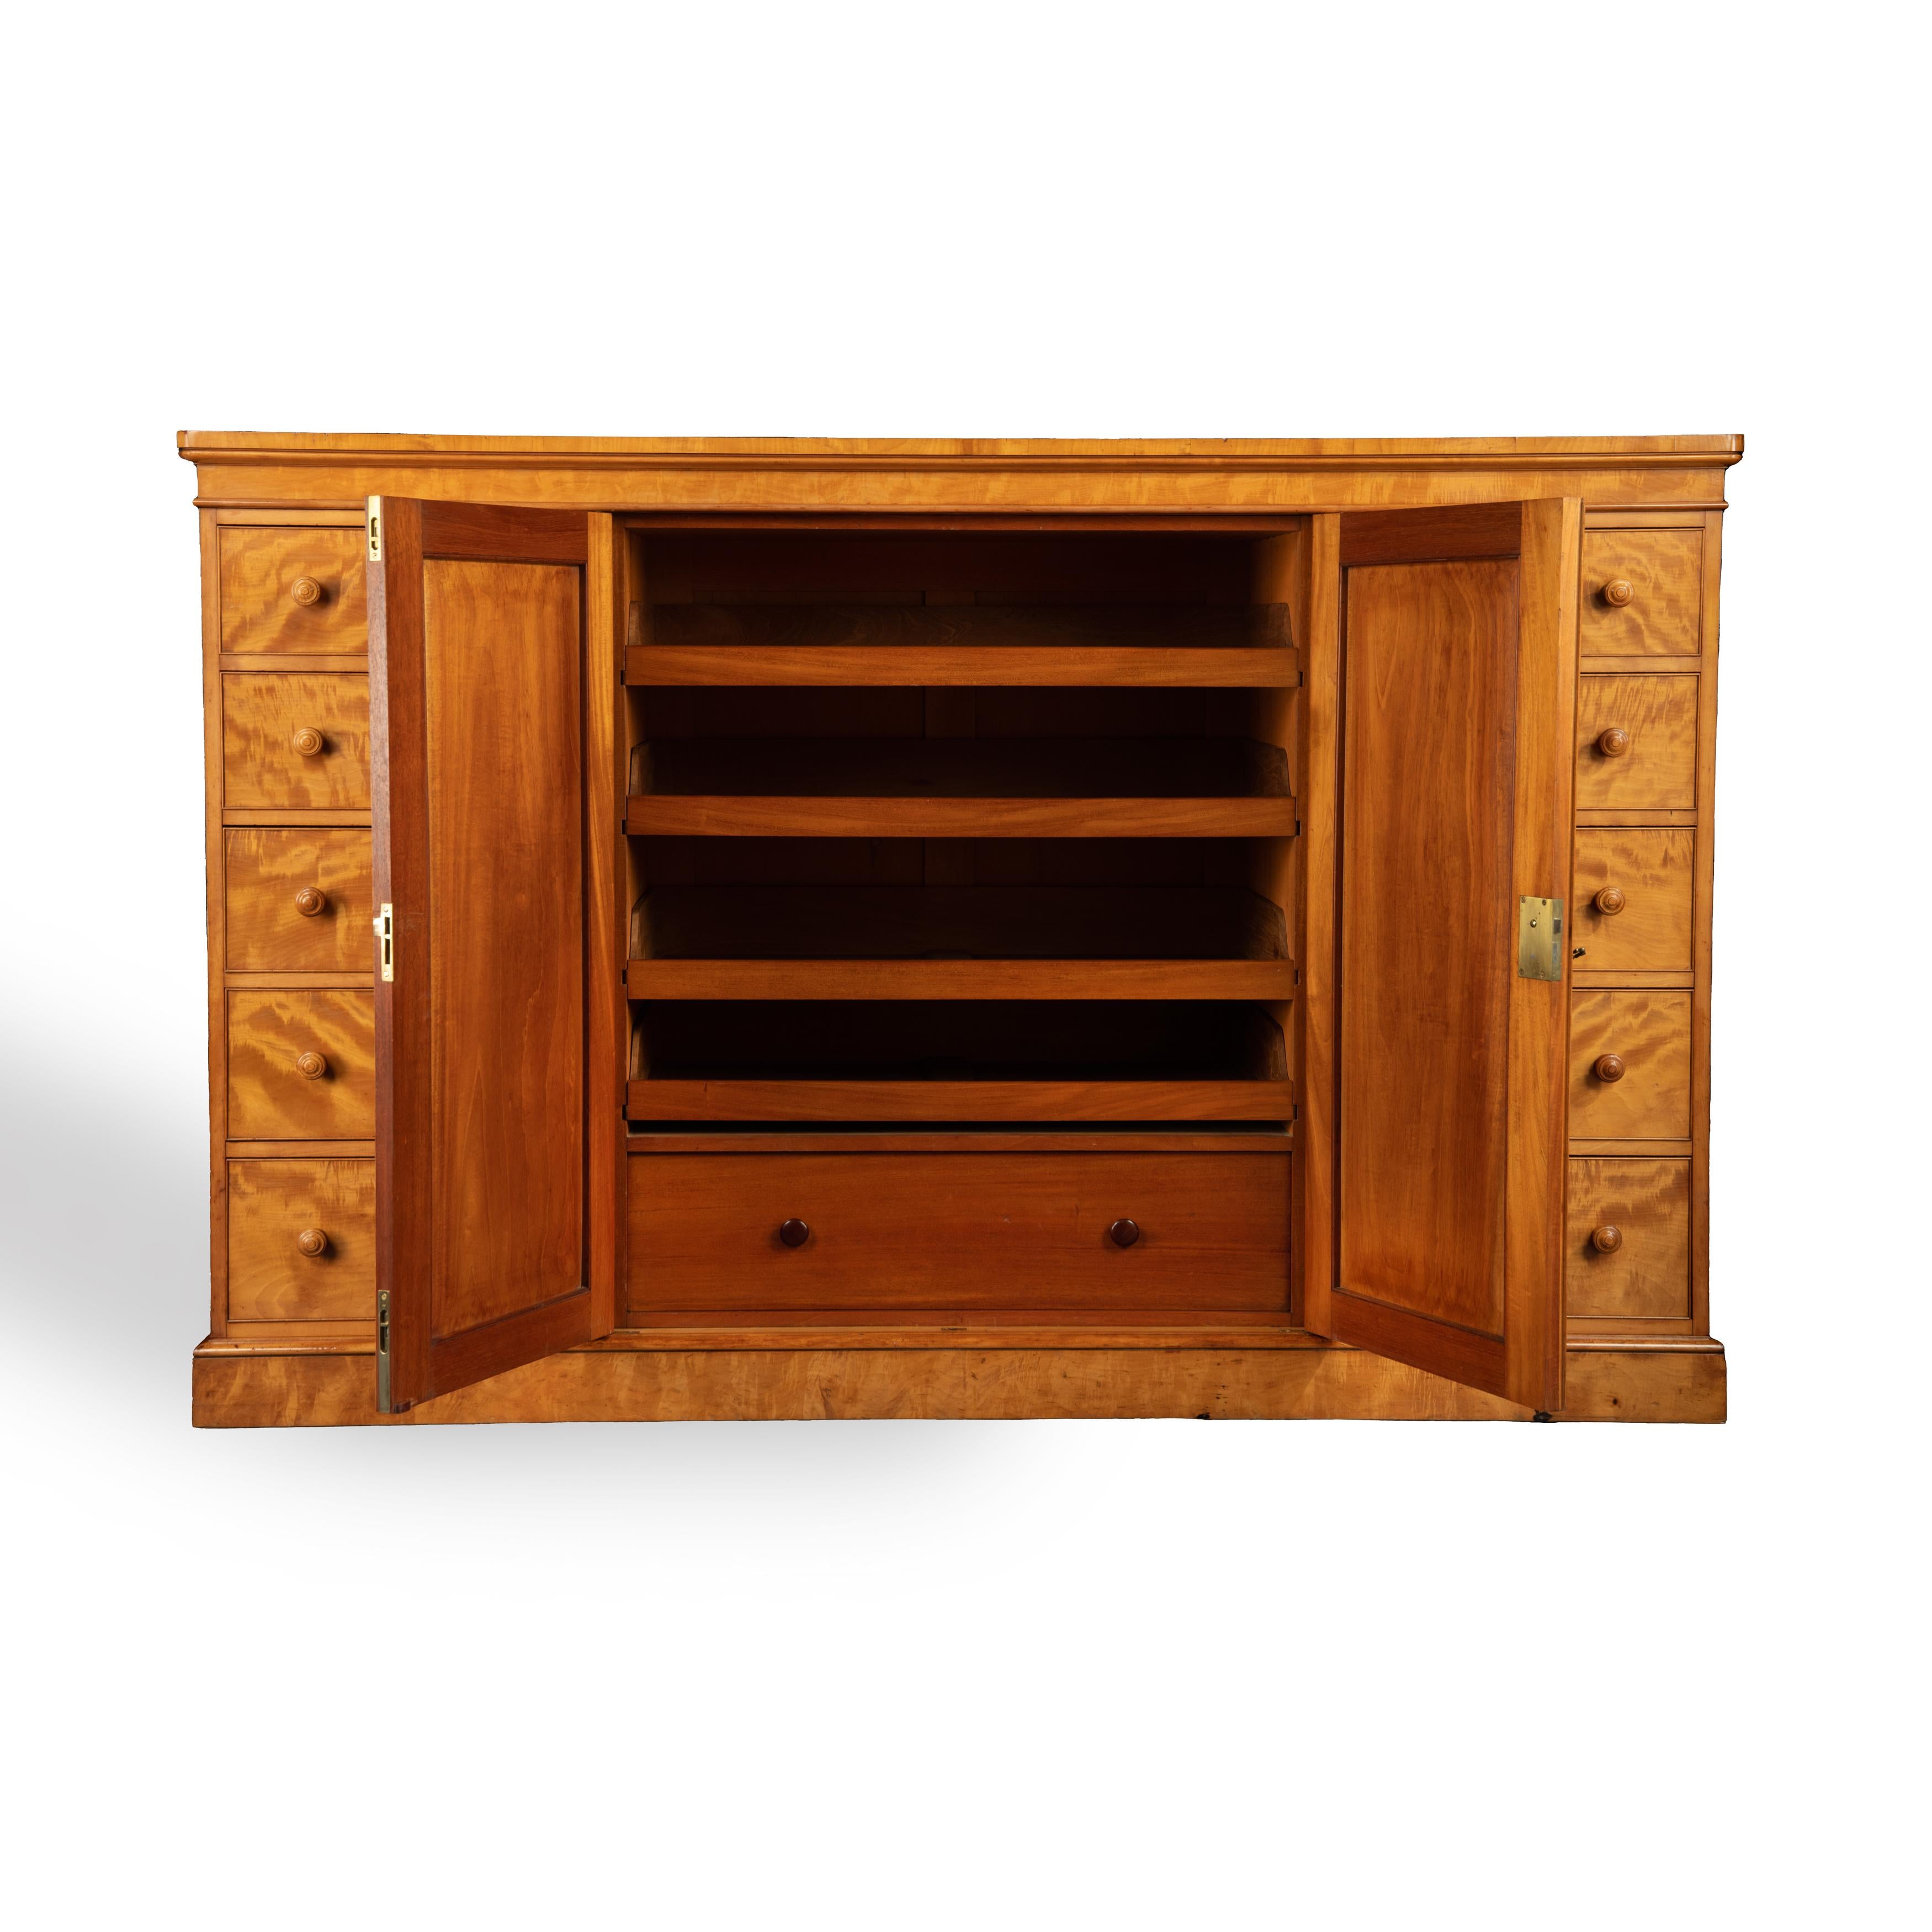 English West Indian Satinwood Gentleman’s Compactum/Press Attributed to Holland & Sons For Sale